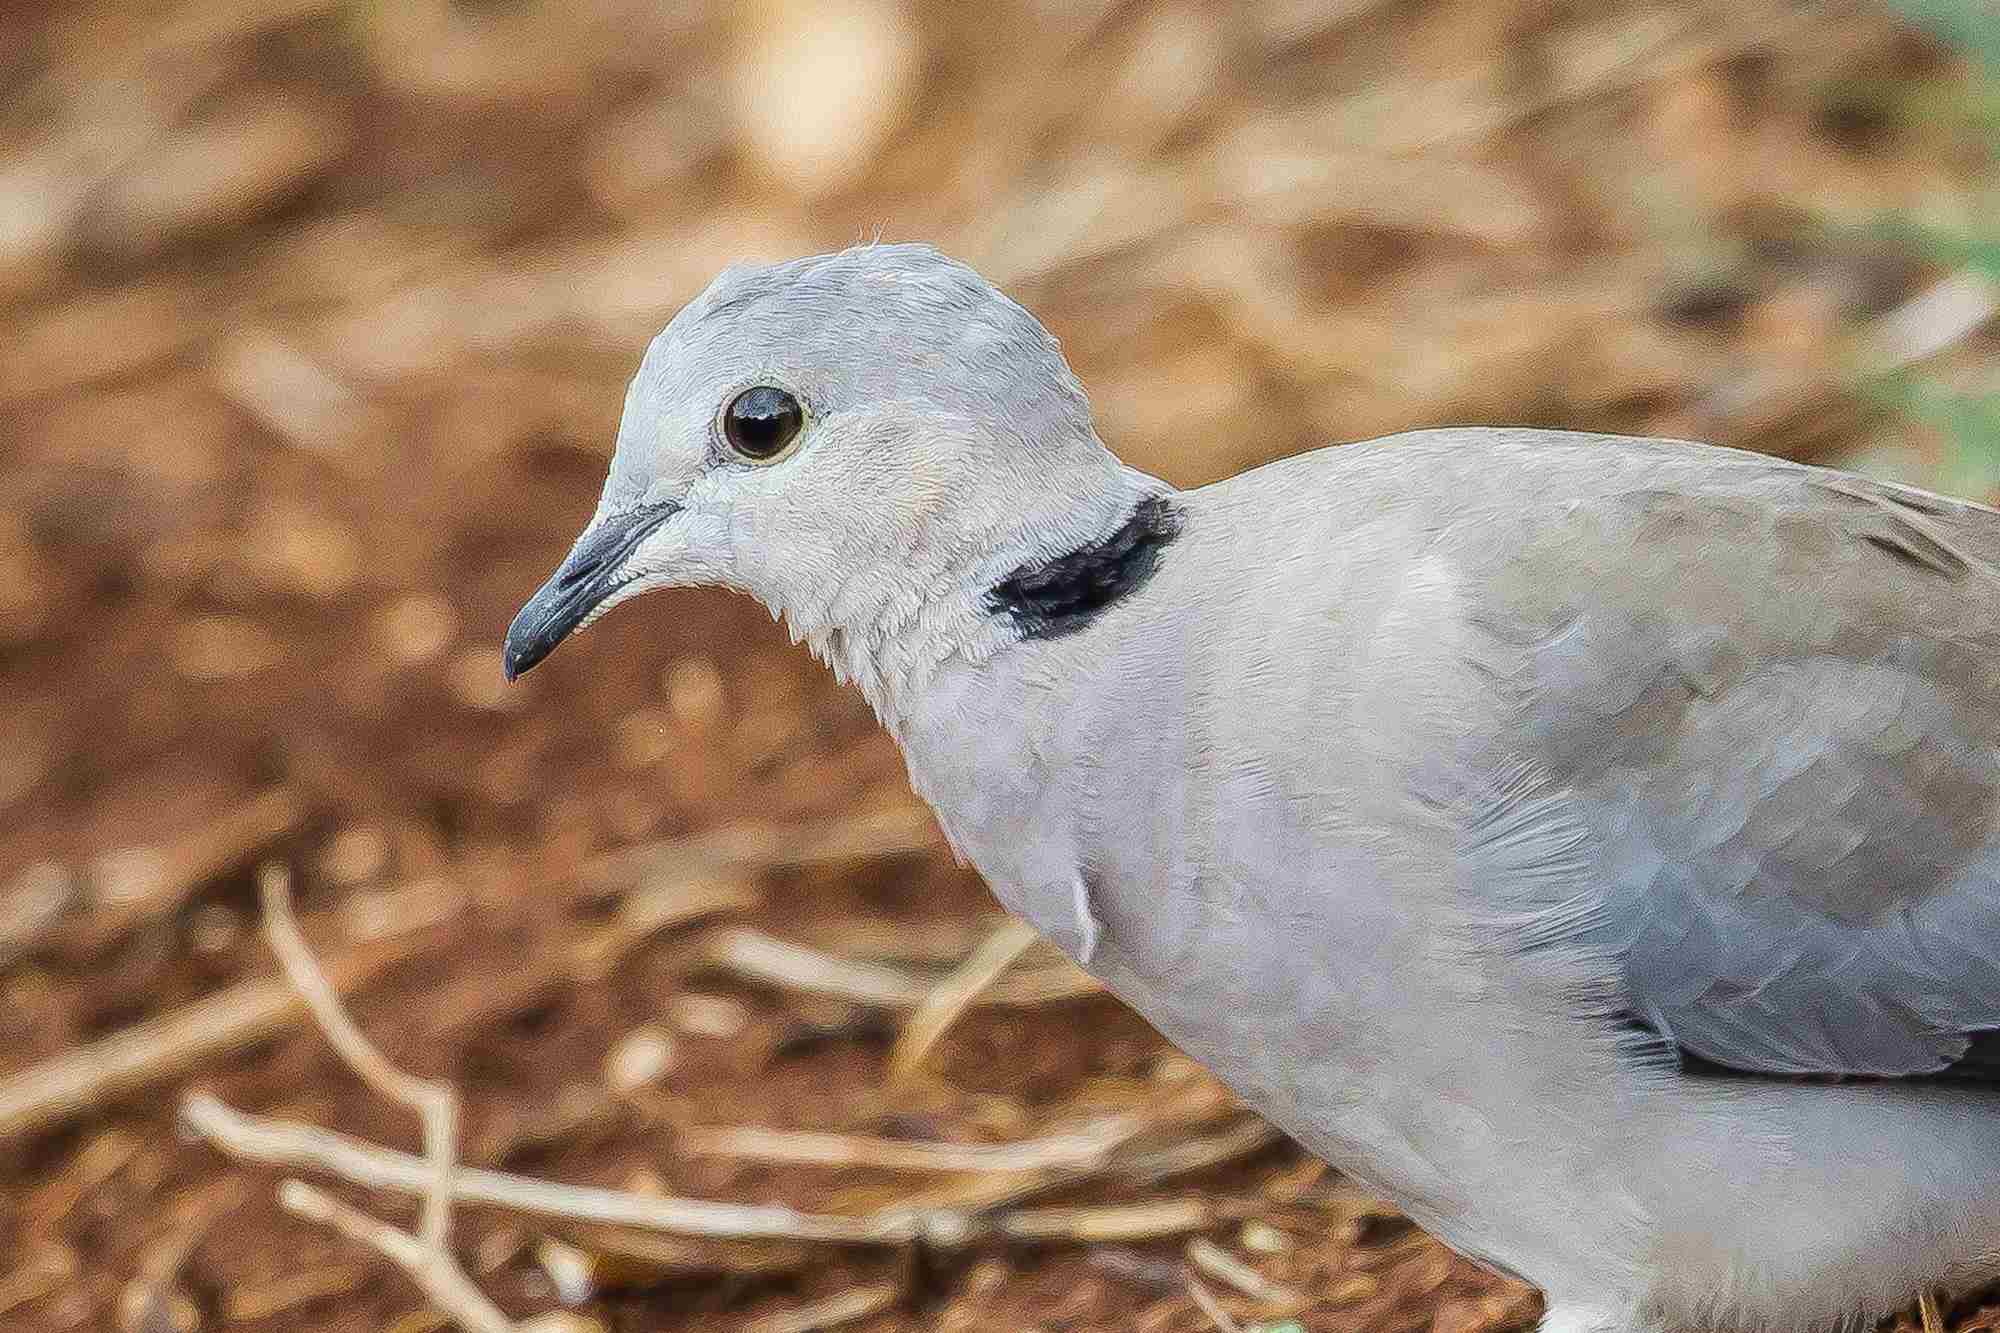 Ring-necked dove on the ground